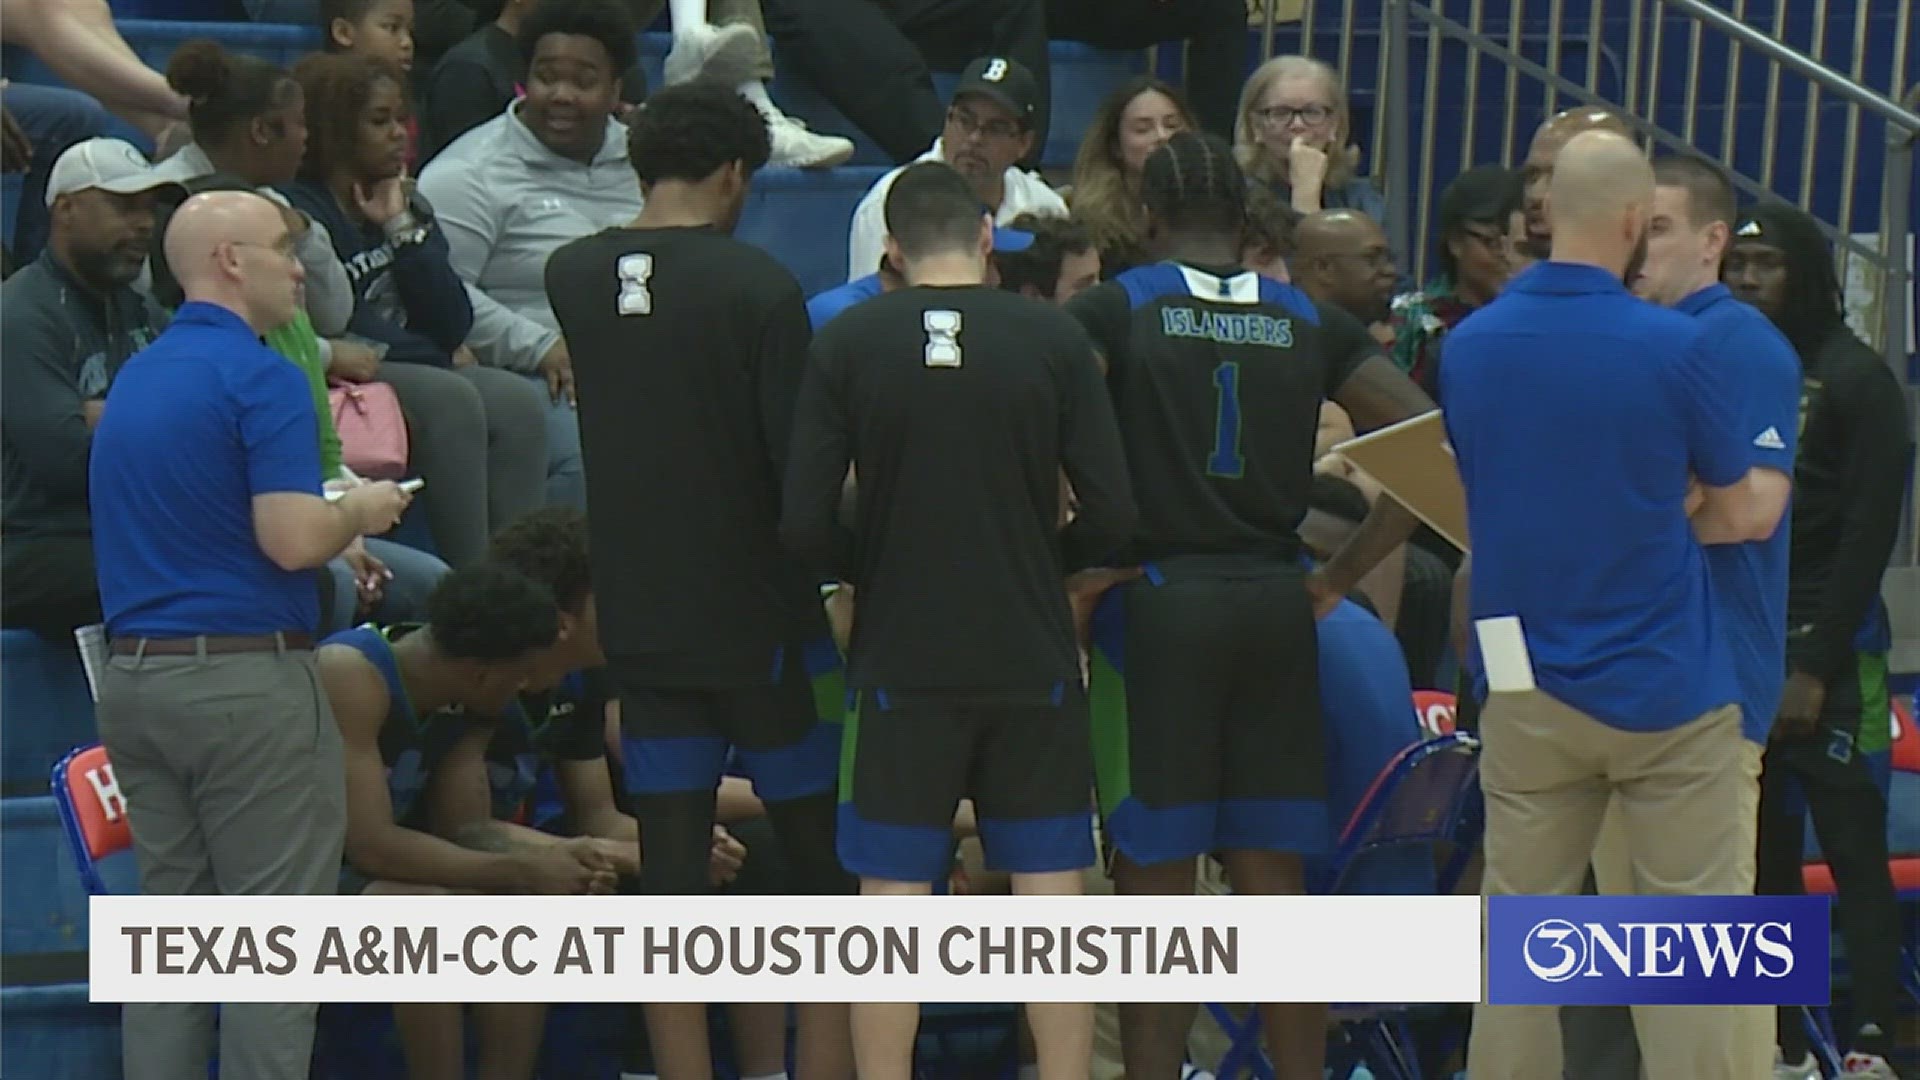 Texas A&M-CC has now won four straight in Southland Conference play. Courtesy: KHOU-TV.